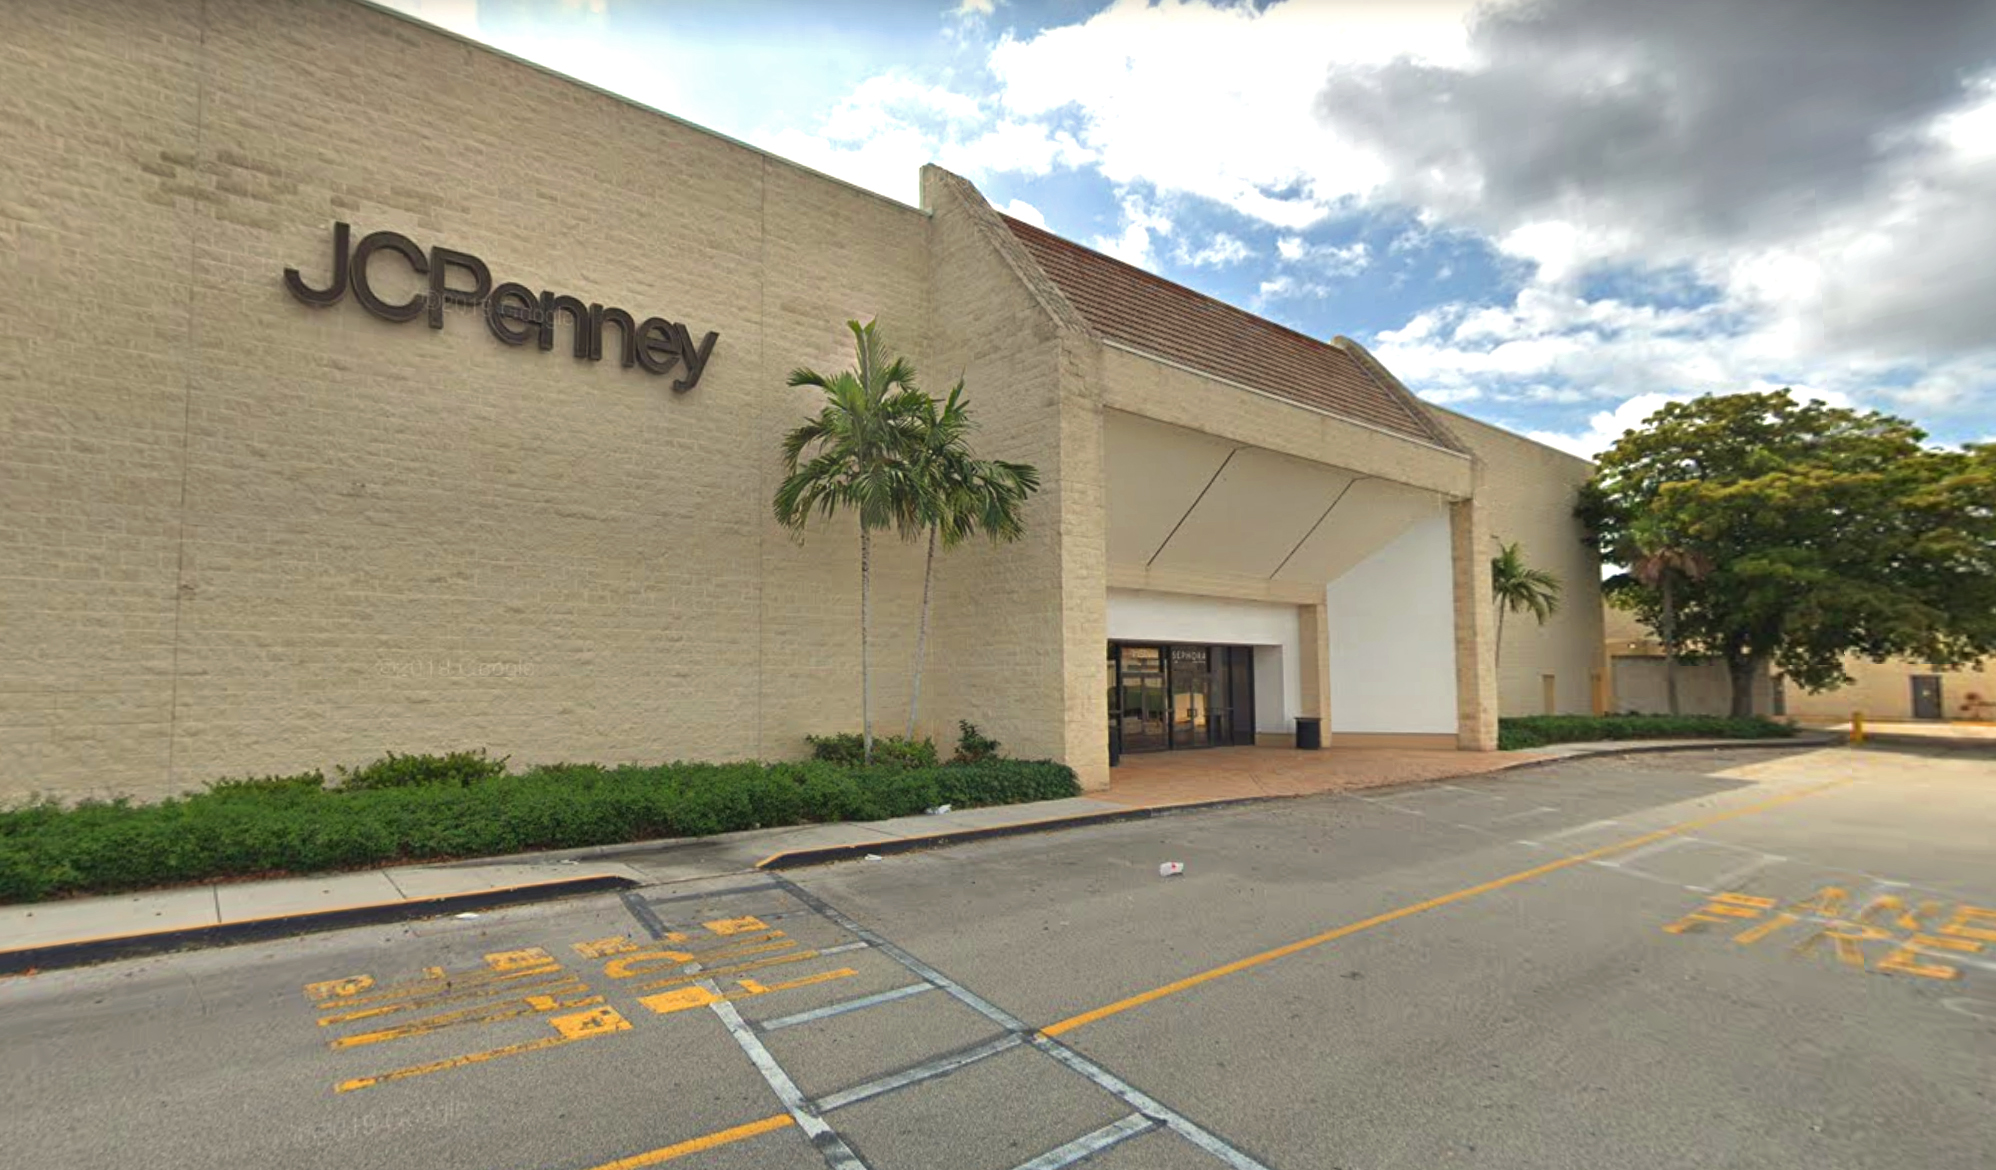 Bankruptcy Proceedings Put Coral Springs’ JCPenney’s in Doubt